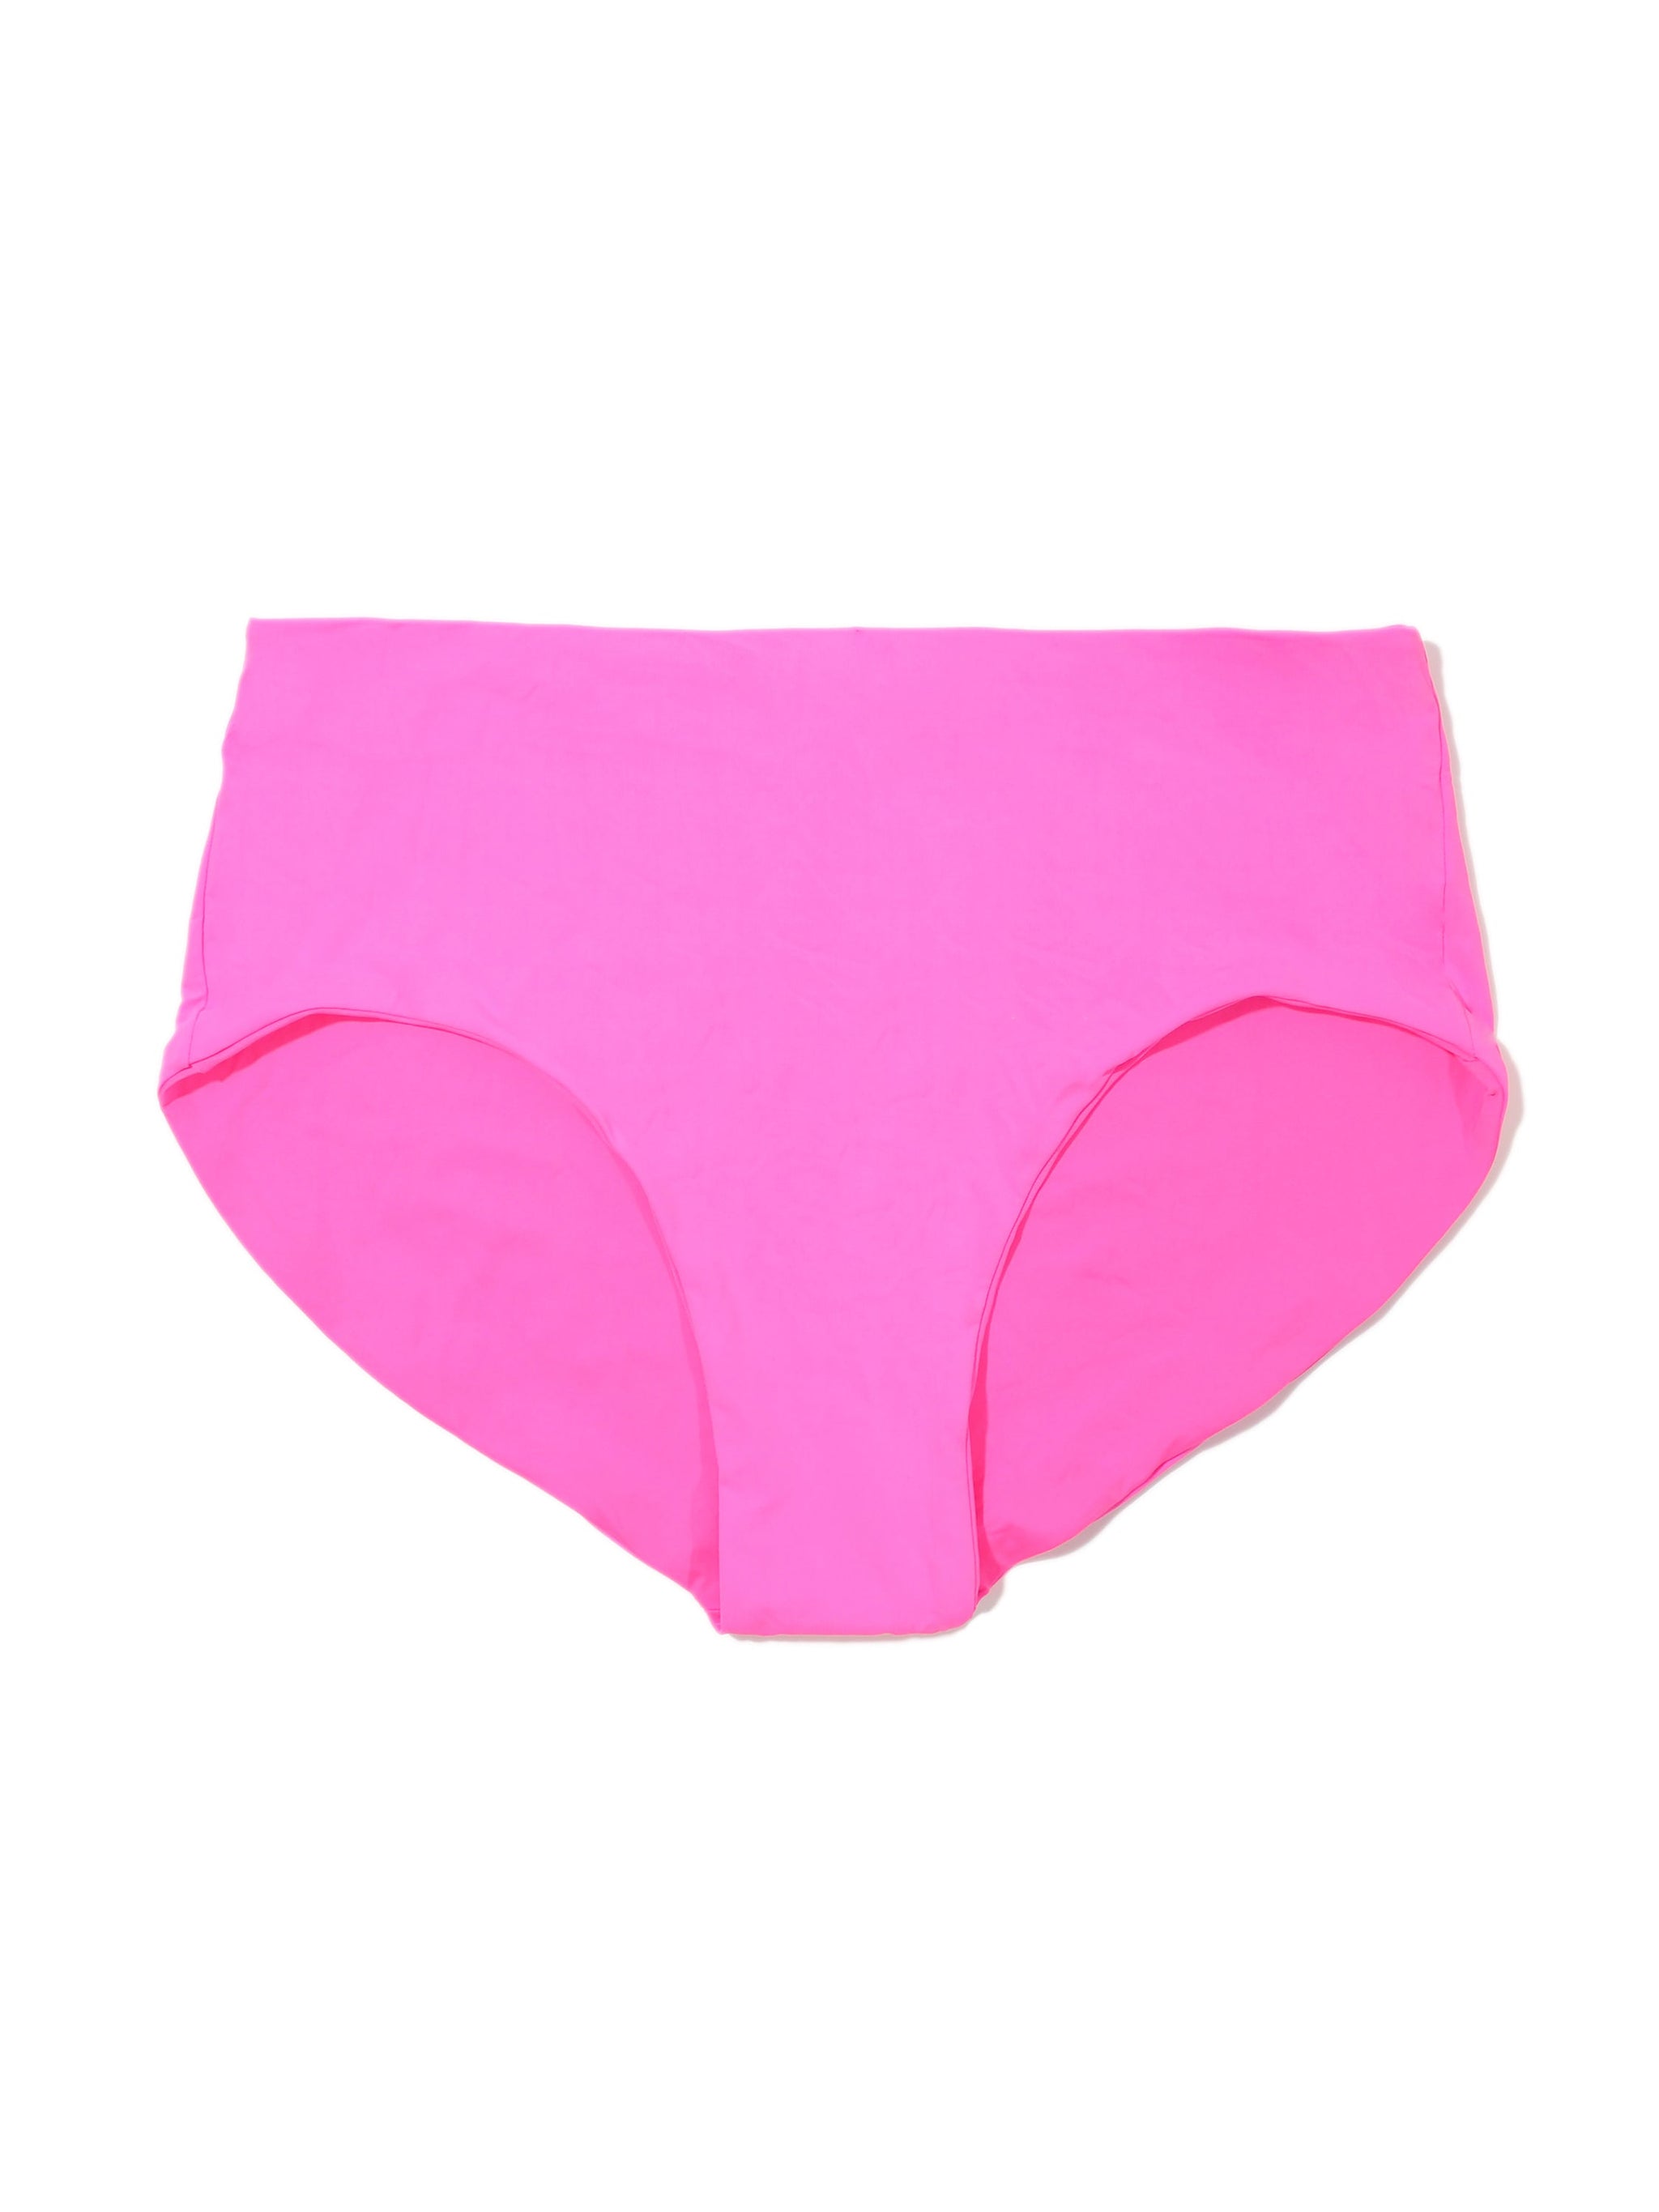 French Brief Swimsuit Bottom Unapologetic Pink